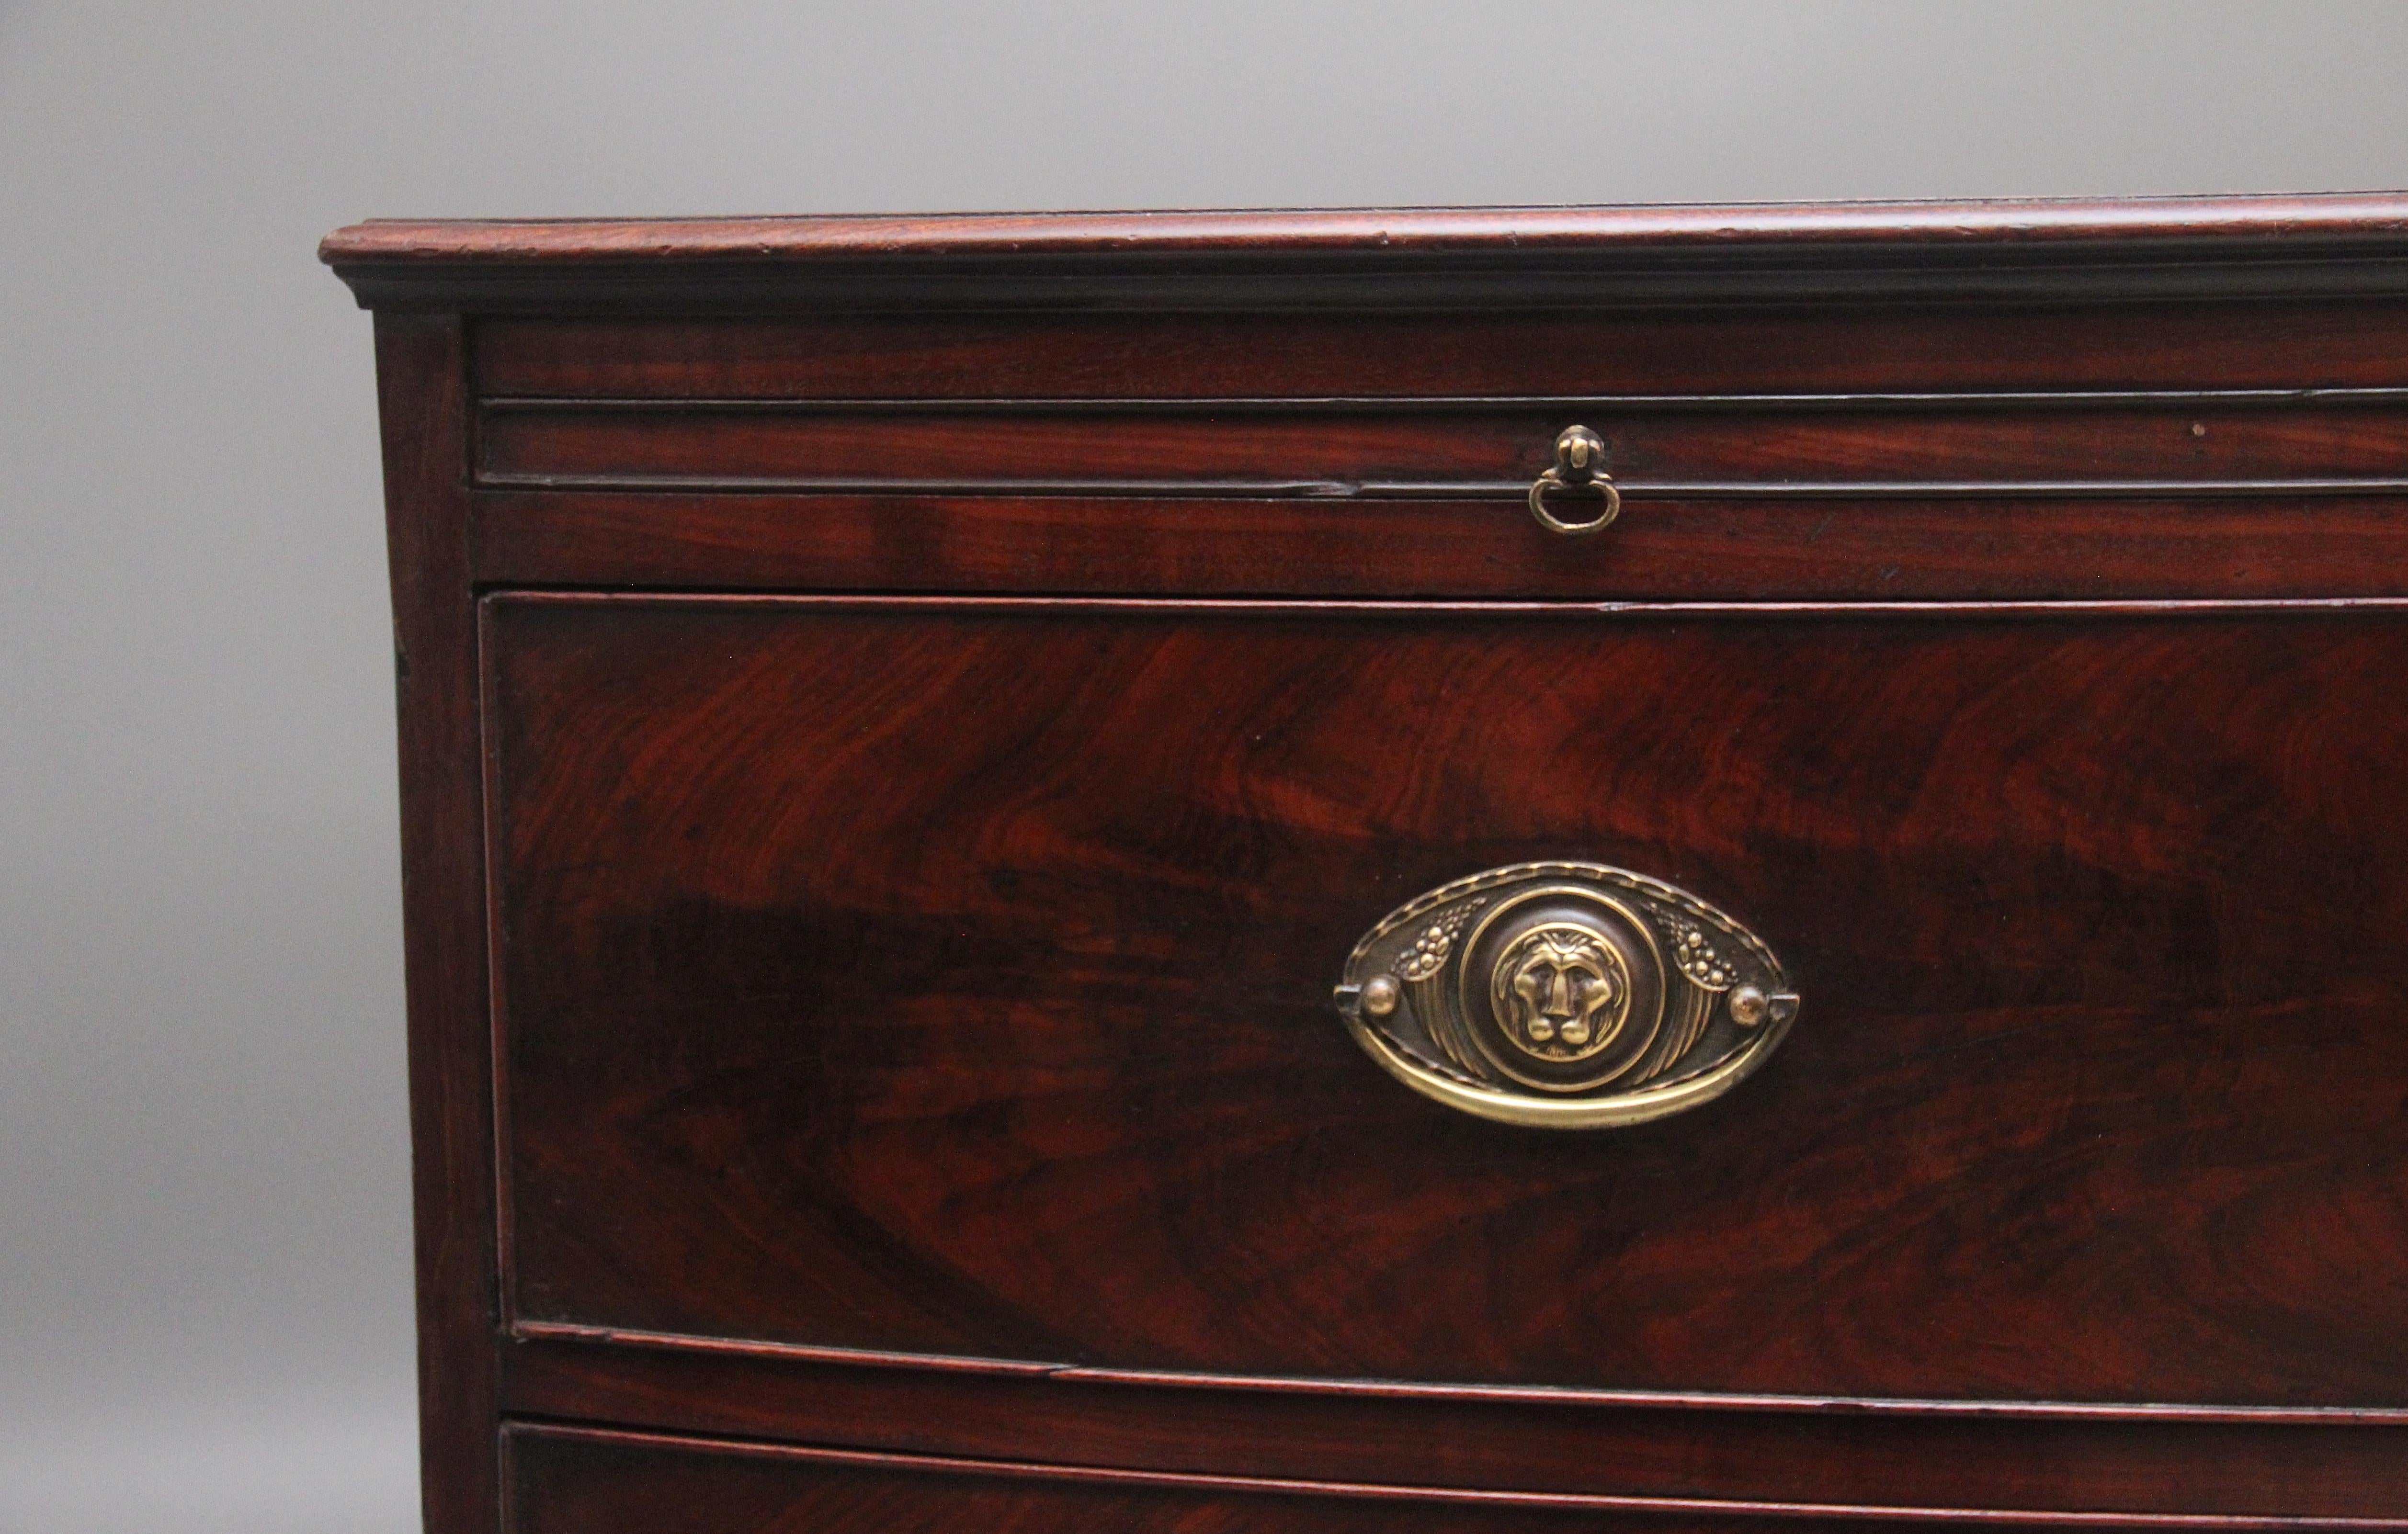 18th Century mahogany bowfront chest of drawers, having a nice figured top with a moulded edge above a brushing slide, three graduated oak lined drawers below with lovely flame mahogany drawer fronts with oval brass plate handles, shaped apron on